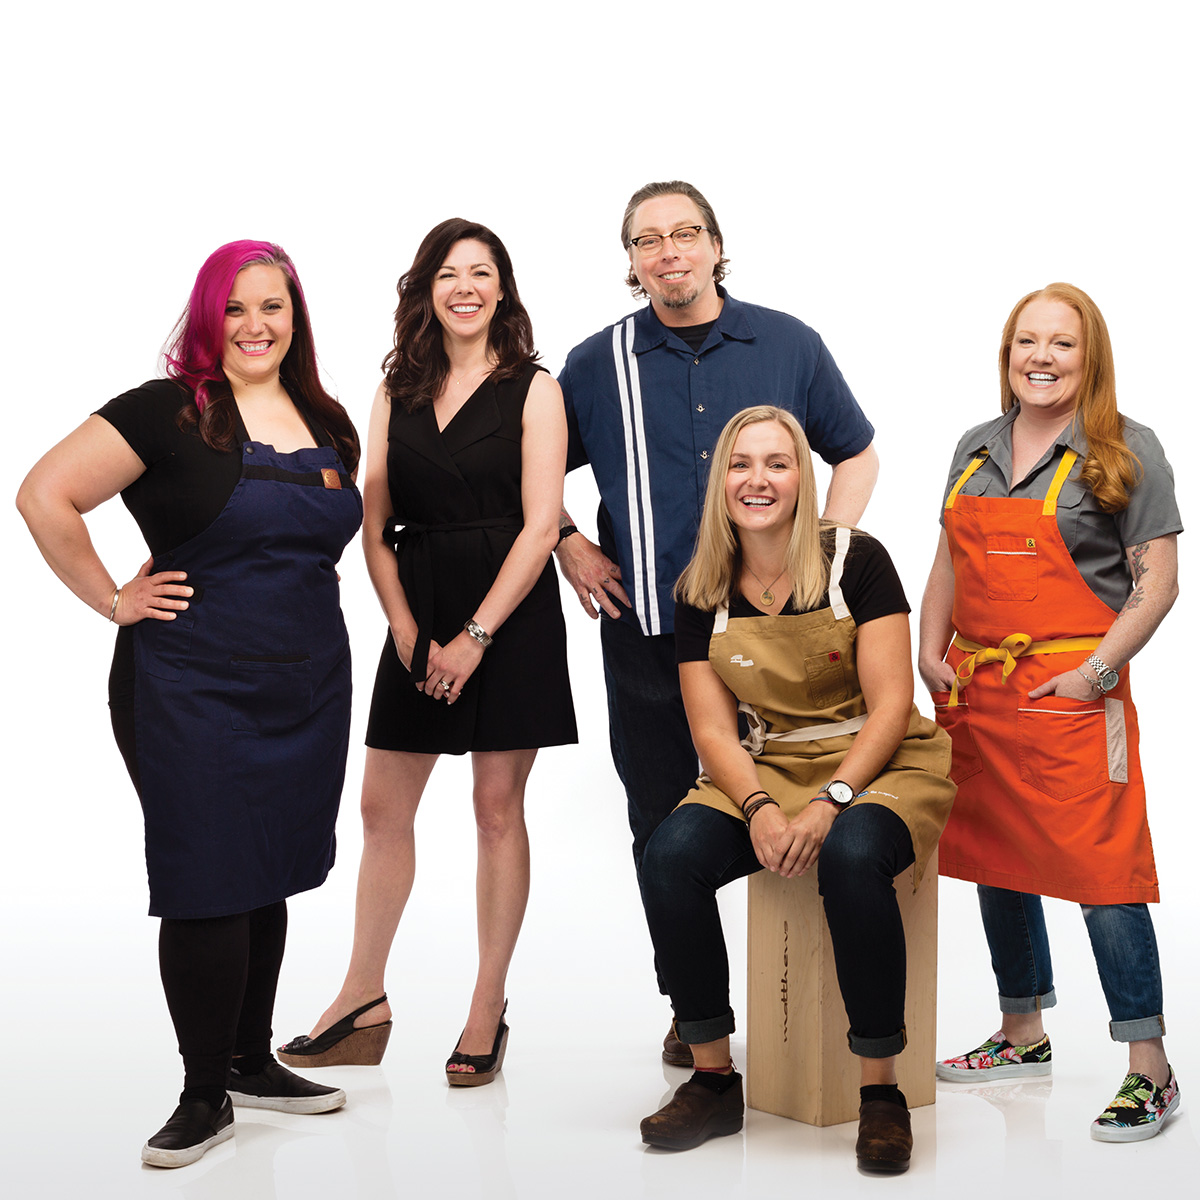 Meghan Thompson (seated) with fellow 2016 Best of Boston honorees (from left) Karen Akunowicz, Katie Gilarde, Todd Maul, and Tiffani Faison. / Photograph by Jason Grow, styling by Laura Dillon/Team for "Best of Boston 2016"